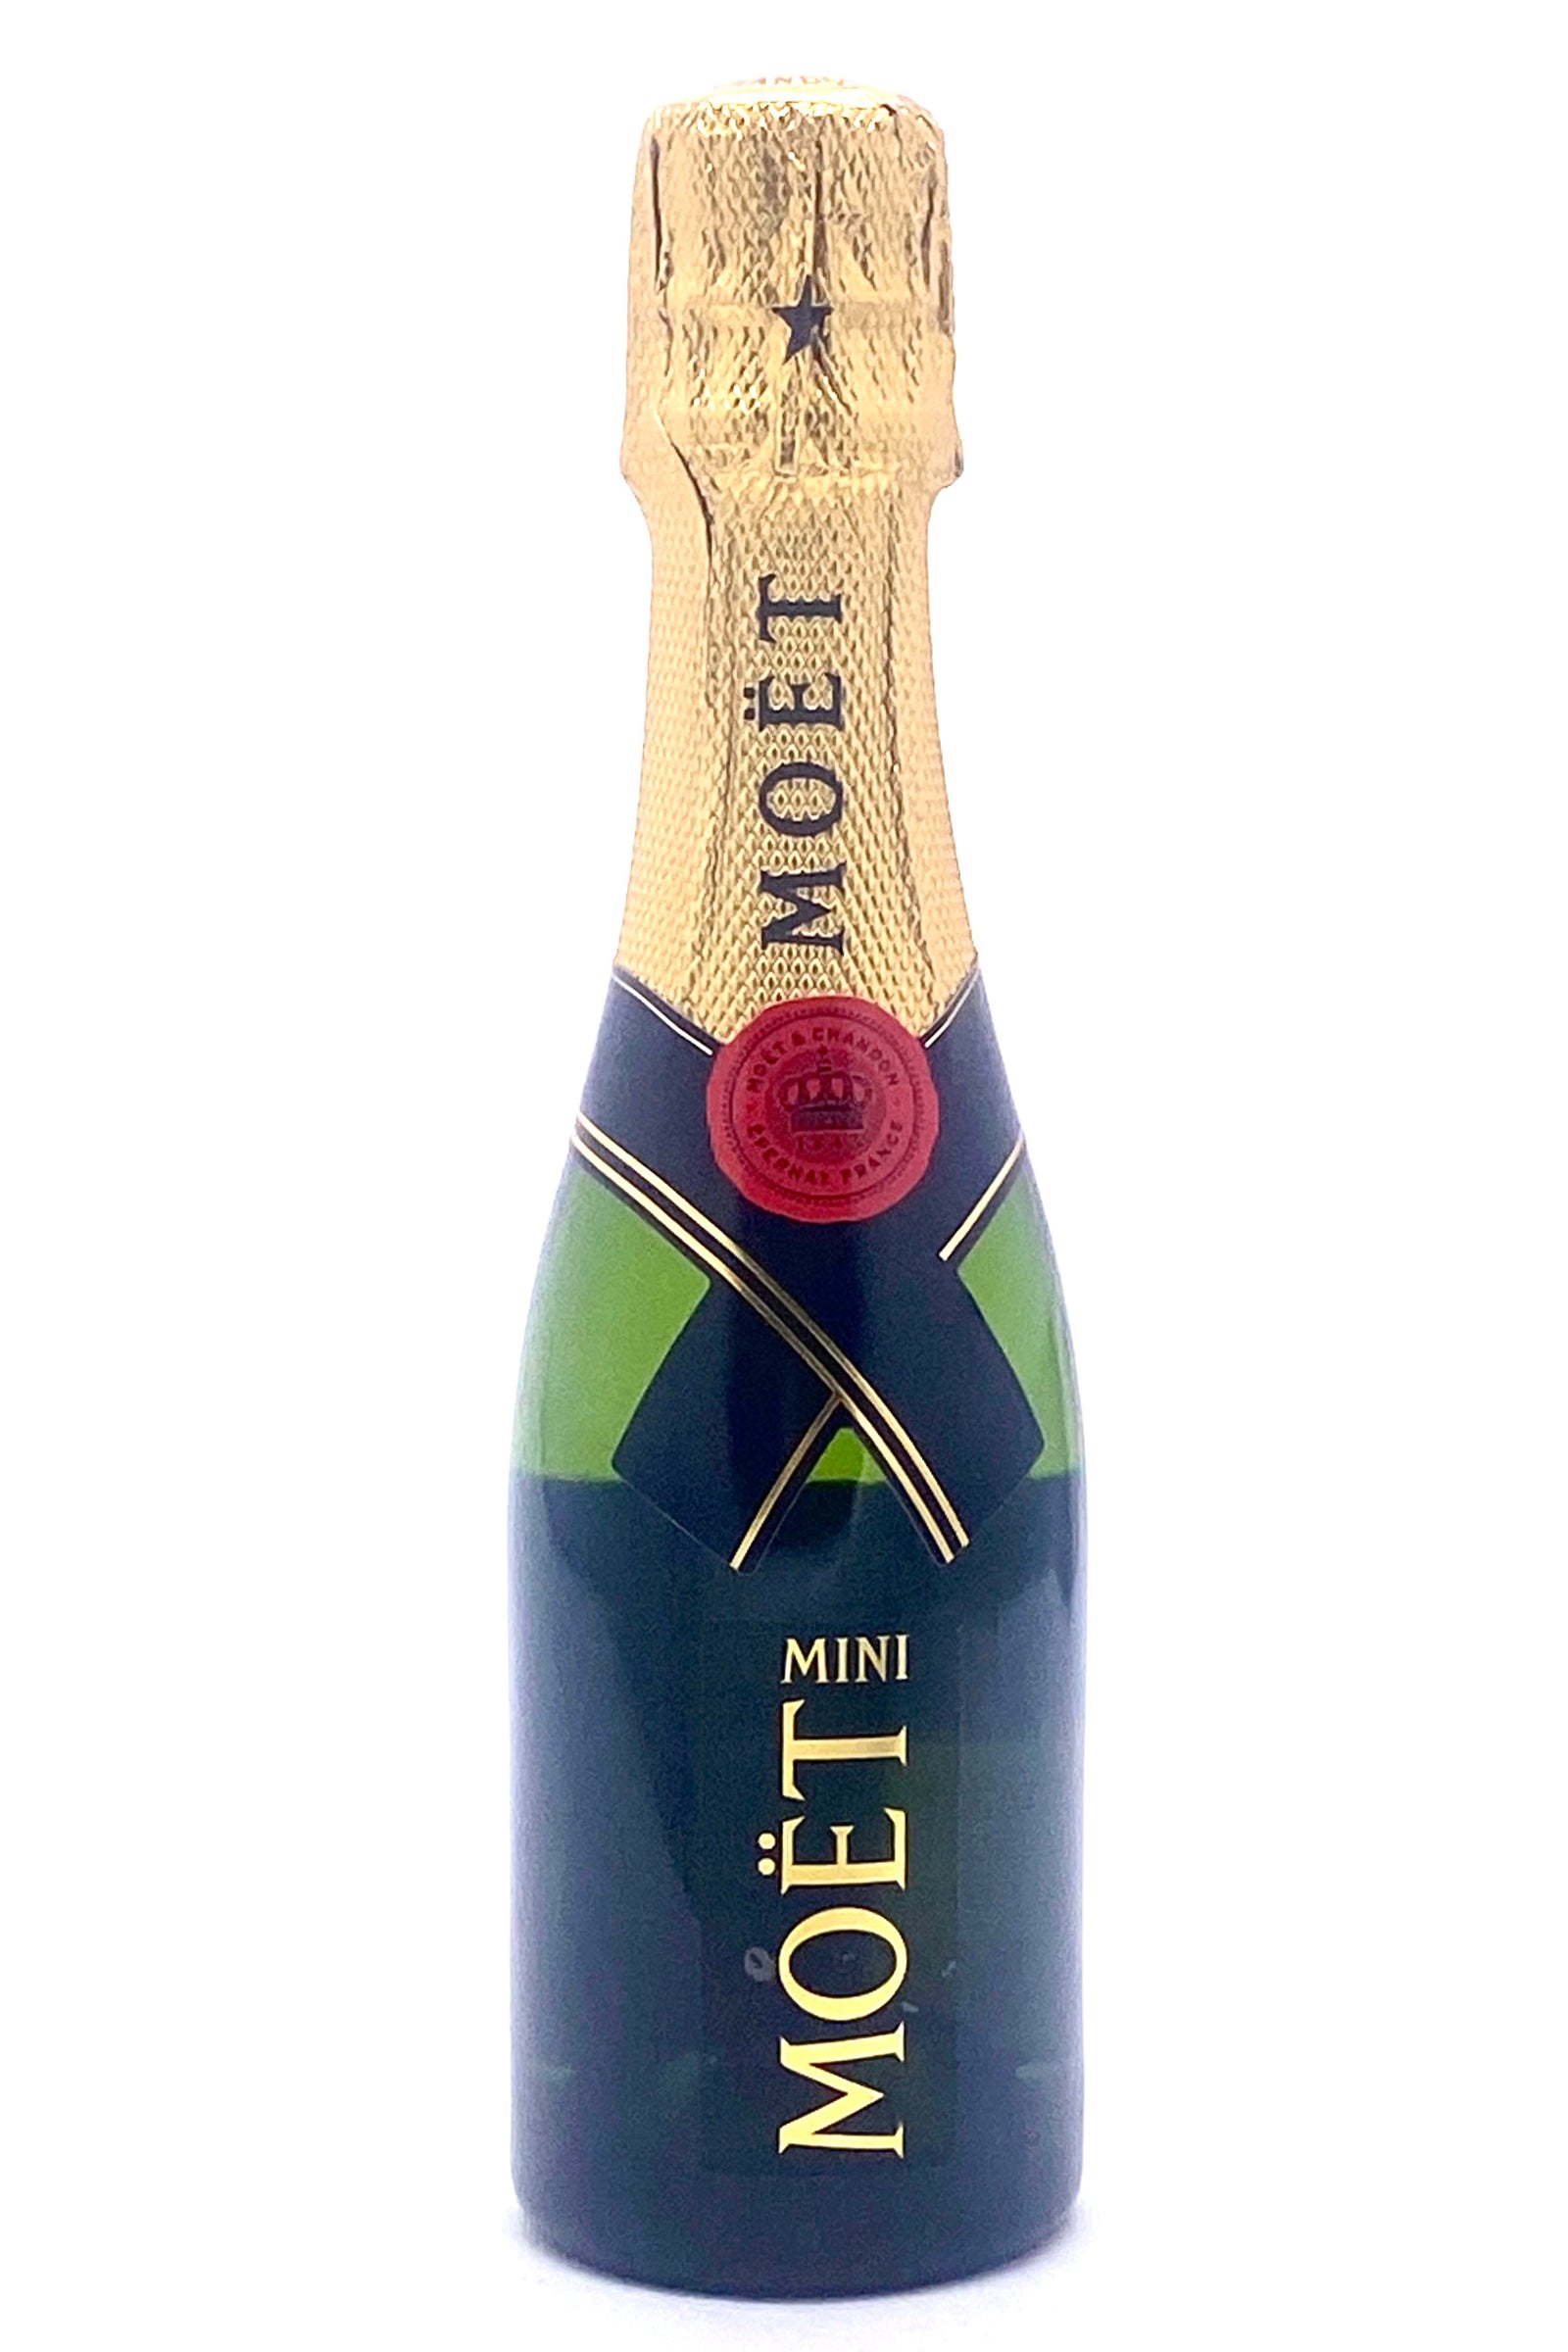 Celebrate with Moet Chandon Champagnes and Wines Blackwell\'s - Spirits & Sparkling Wines